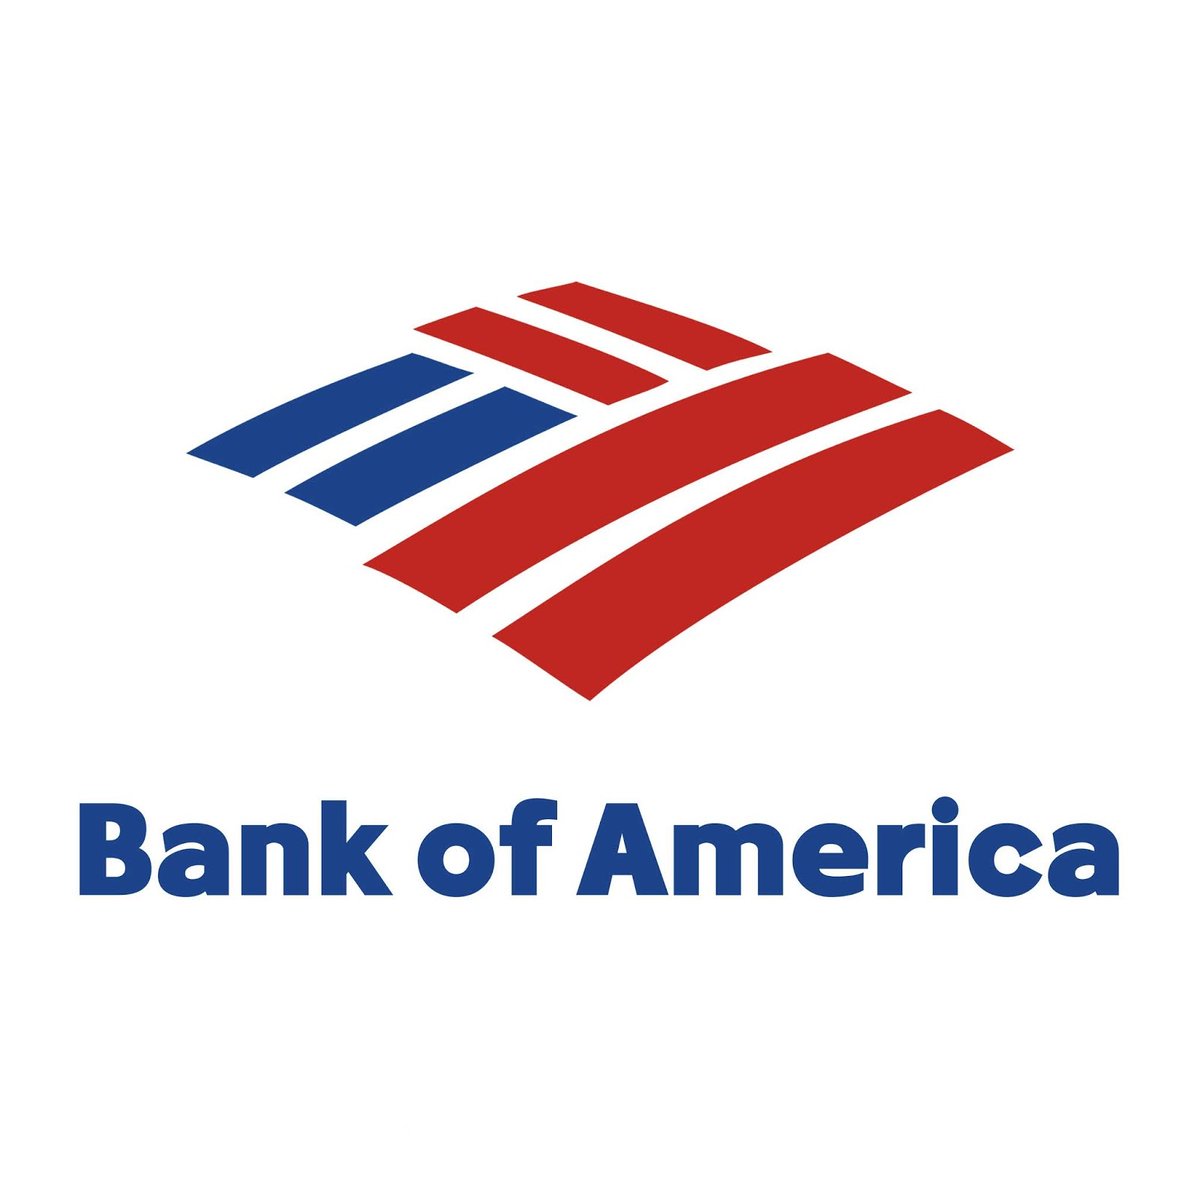 Bank of America

American multinational investment bank and financial services provider

Don't bank with Bank of America
Don't work for Bank of America
Don't invest with Bank of America

That's why ↓

#FreePalestine #BoycottIsrael 
#BoycottIsraeliProducts